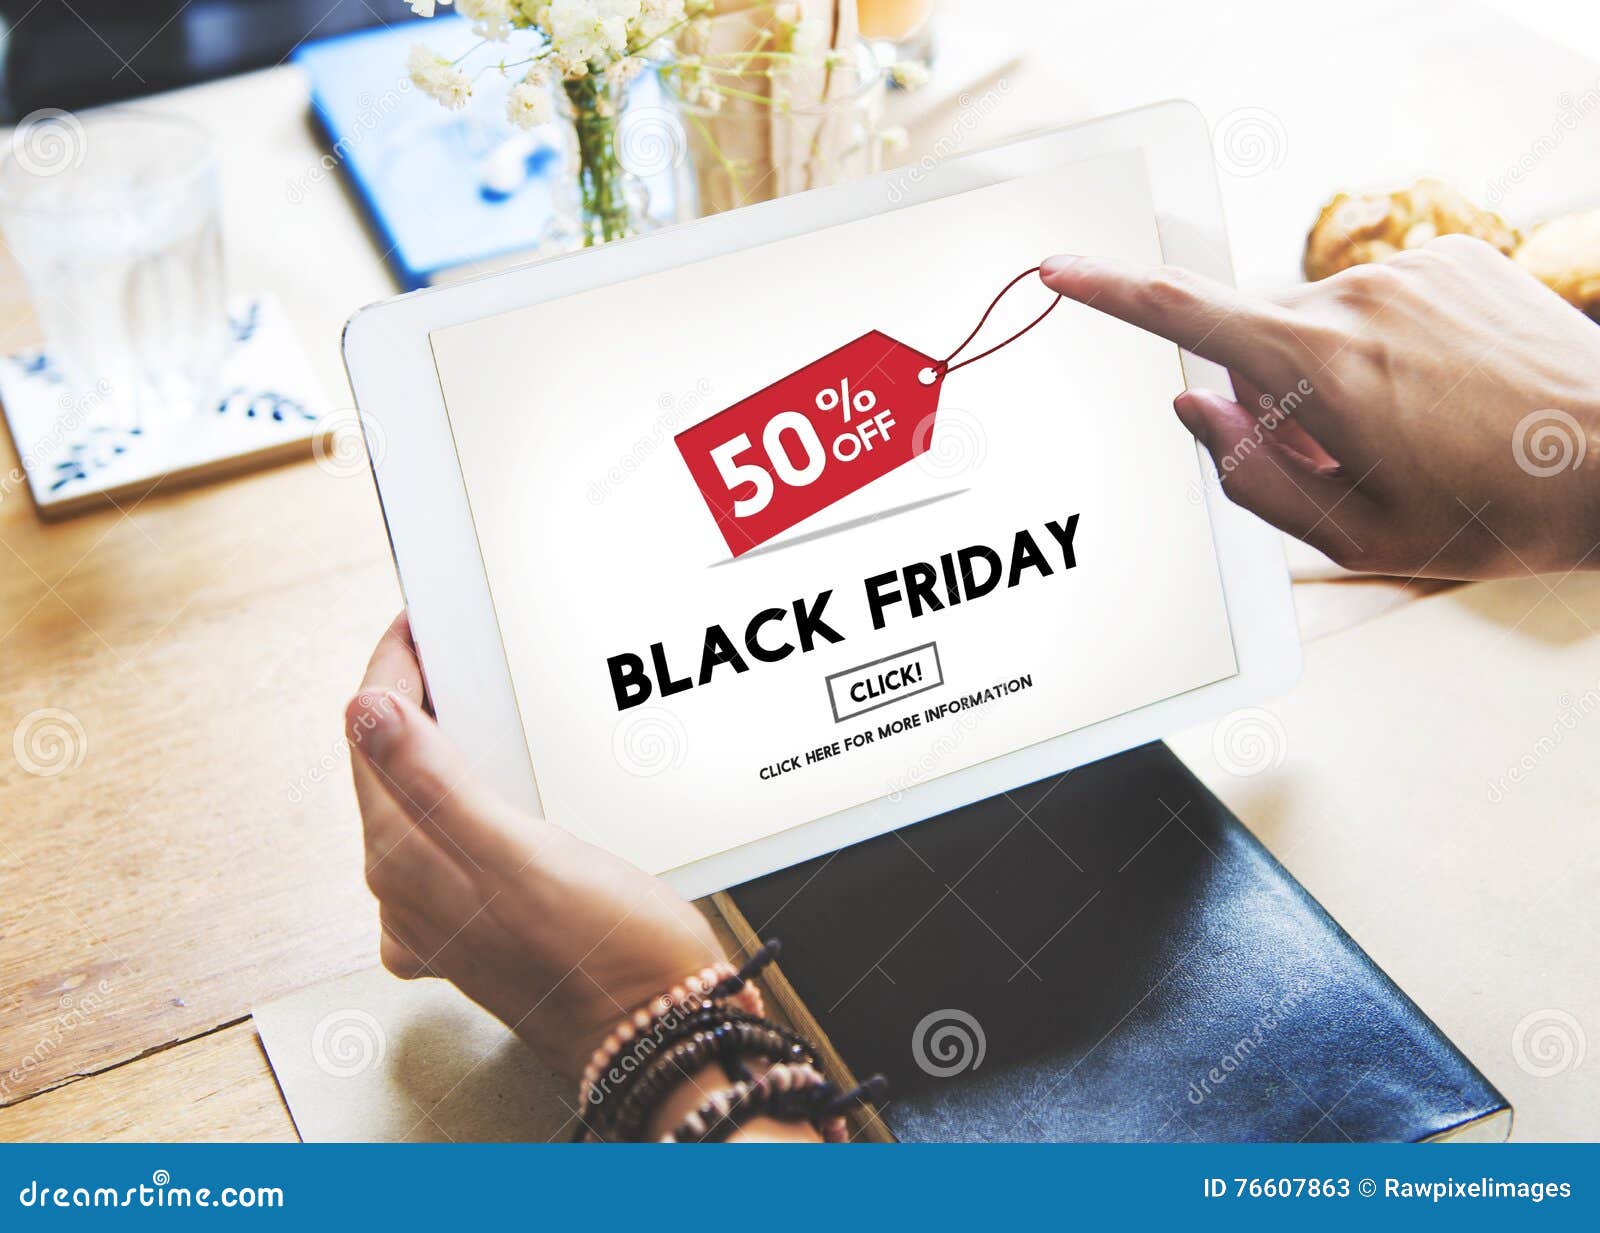 black friday promotion discount consumer shopping concept